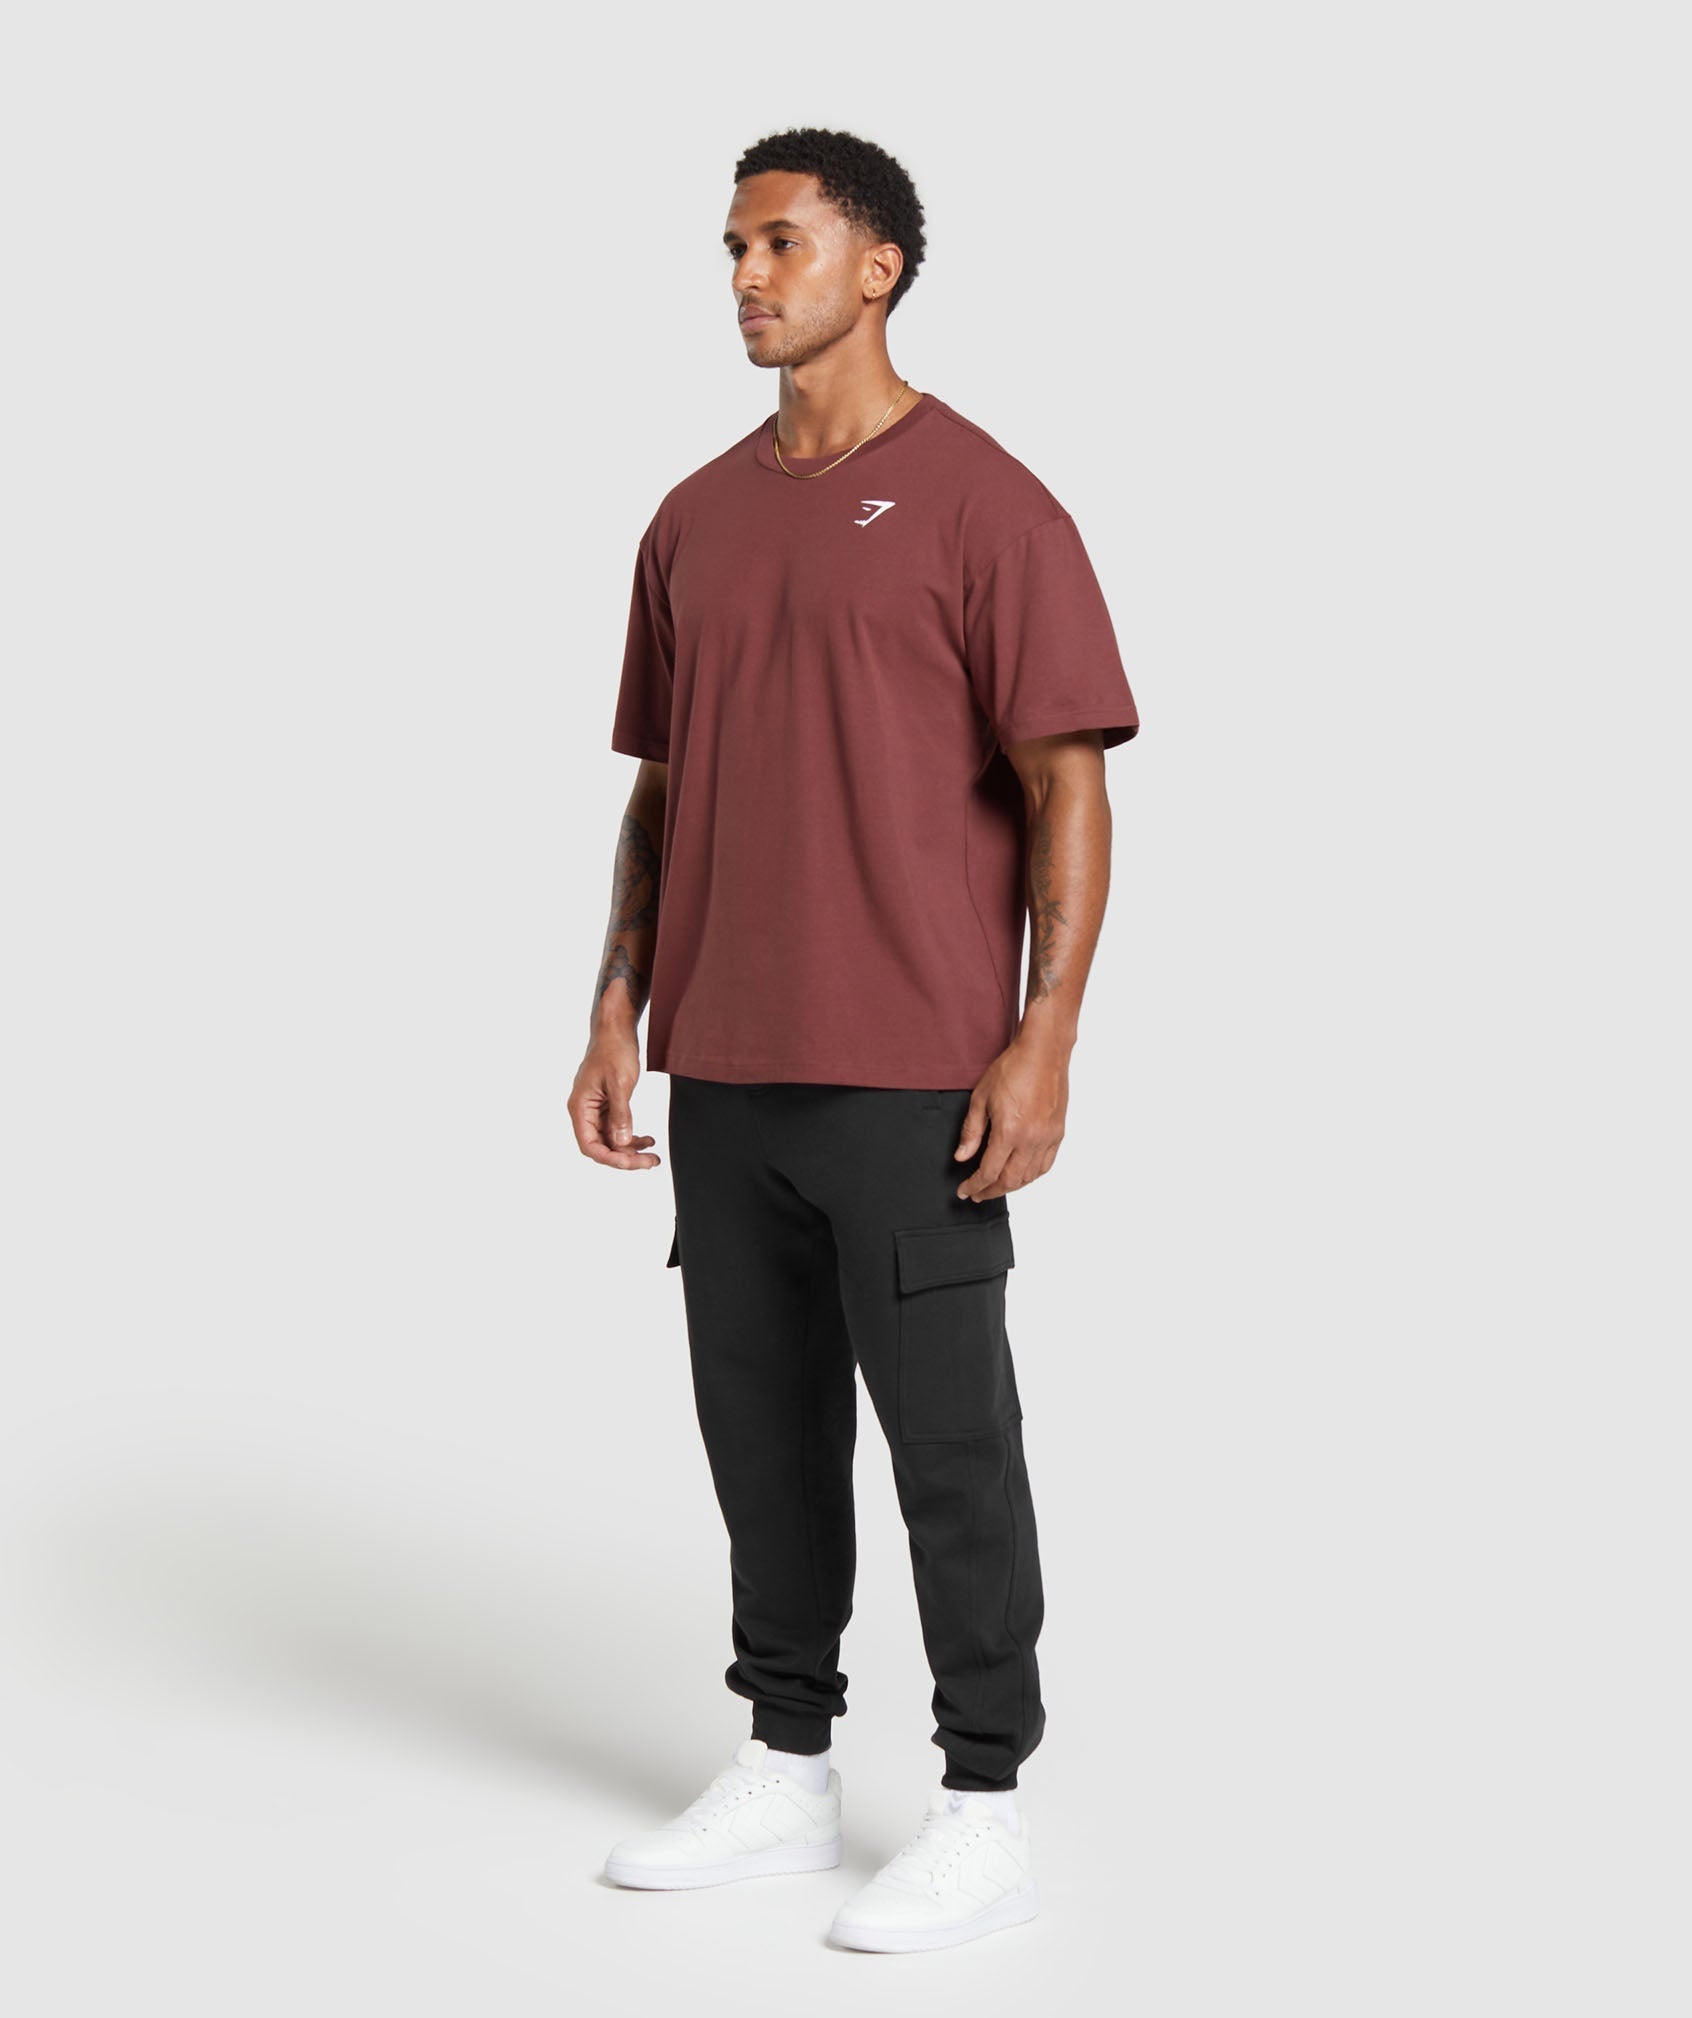 Essential Oversized T-Shirt in Burgundy Brown - view 4